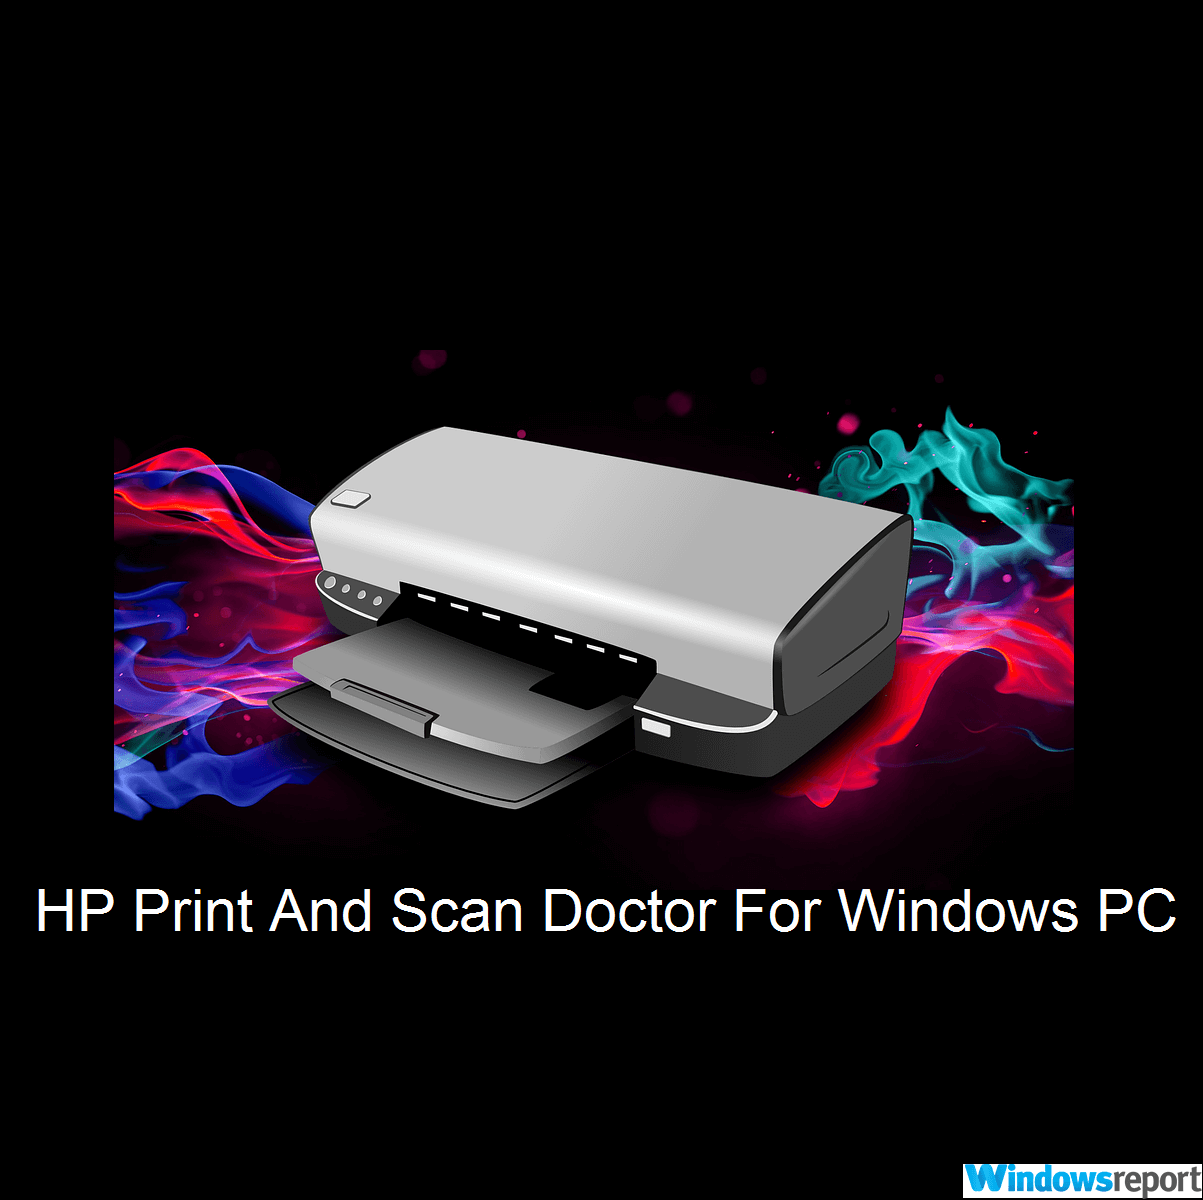 HP Print And Scan Doctor For Windows PC